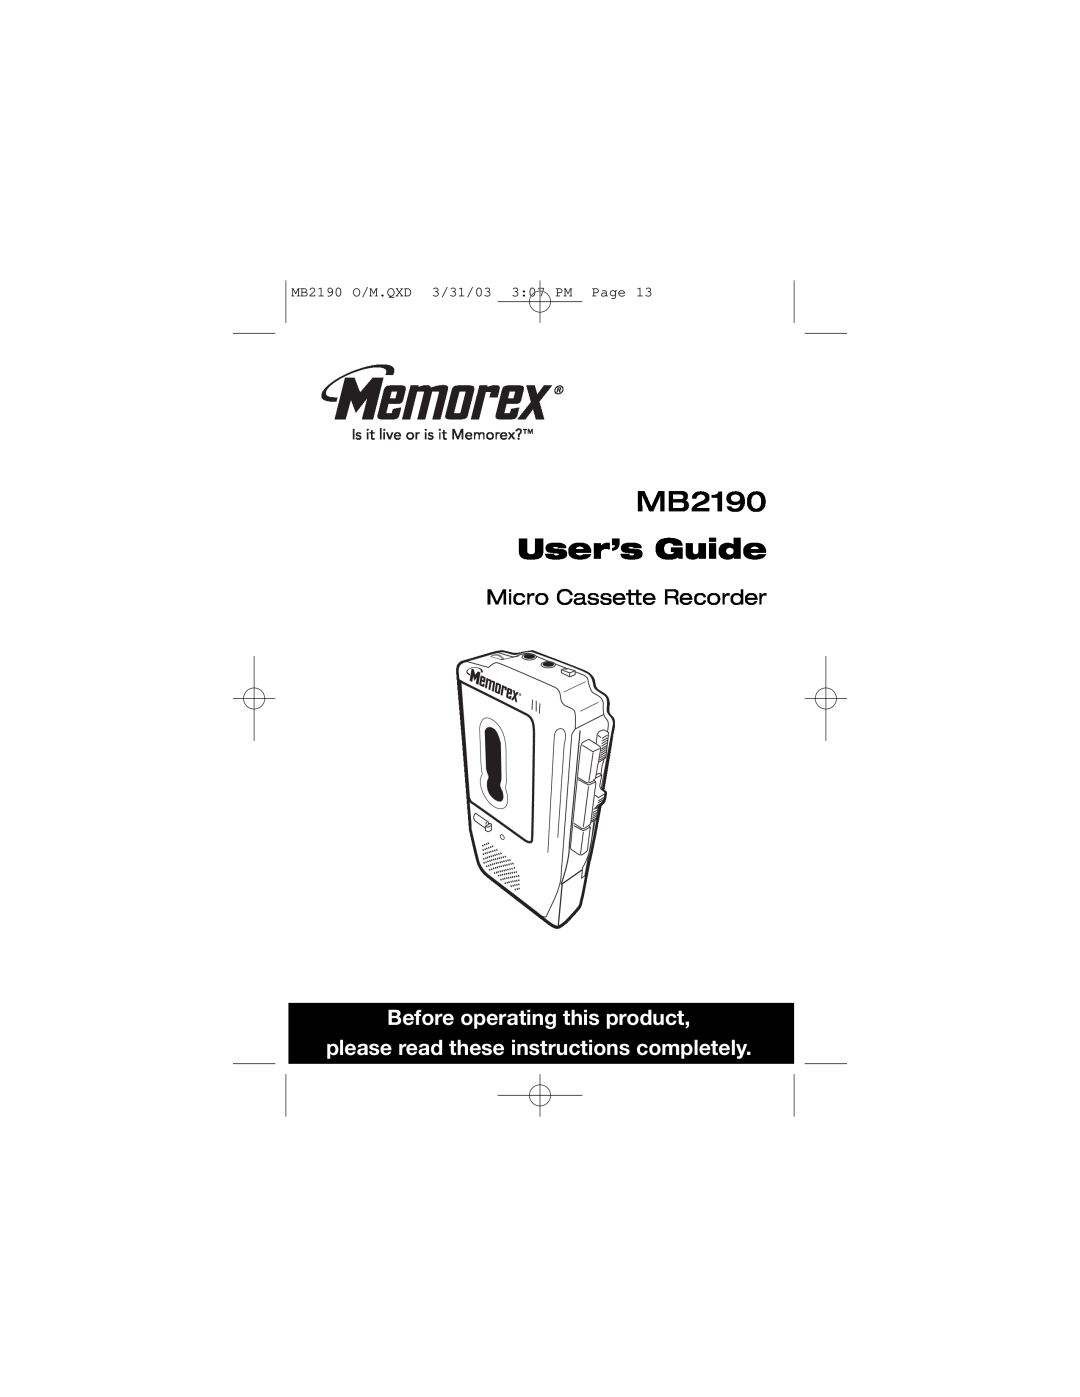 Memorex MB2190 manual Micro Cassette Recorder, Before operating this product, please read these instructions completely 